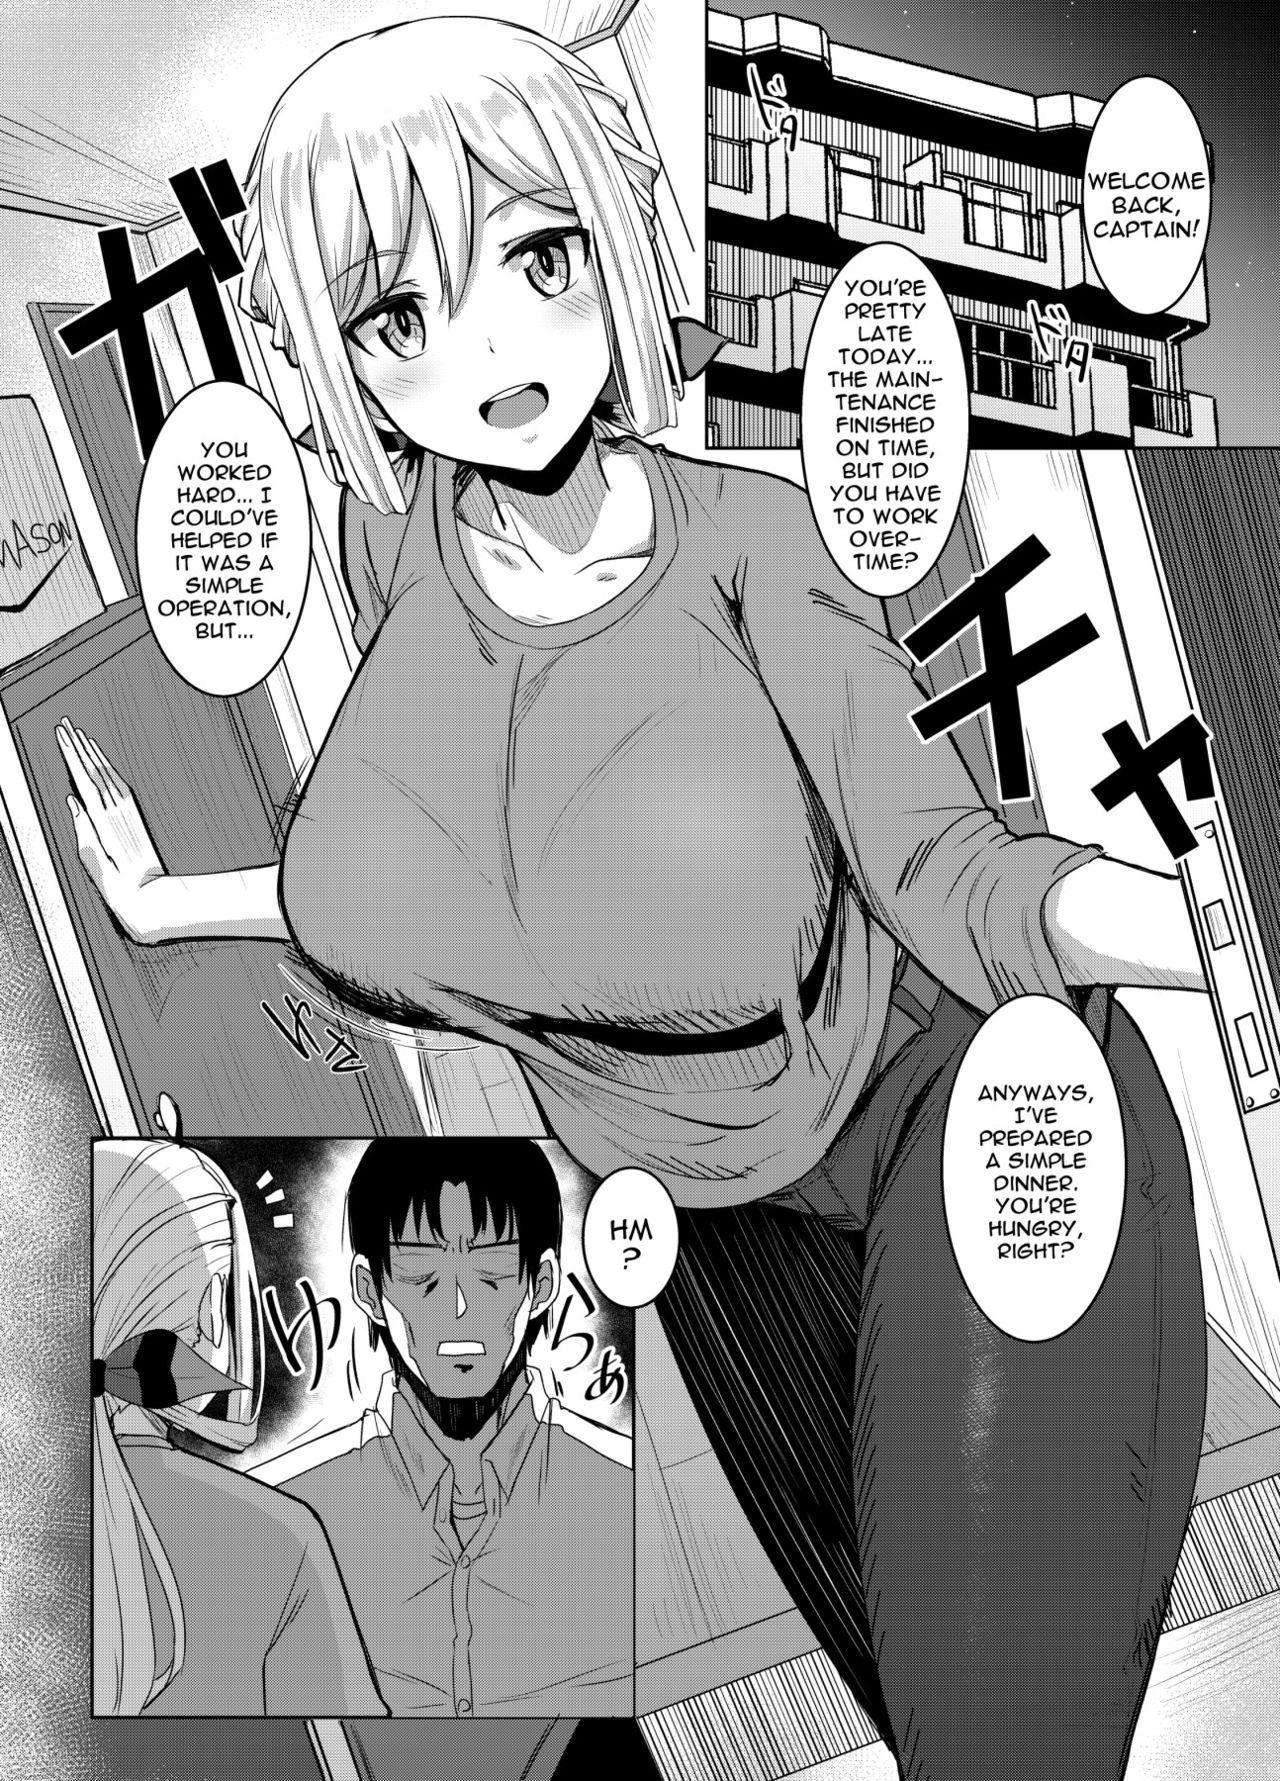 Family Taboo Angels Liebe - Alice gear aegis Police - Page 3